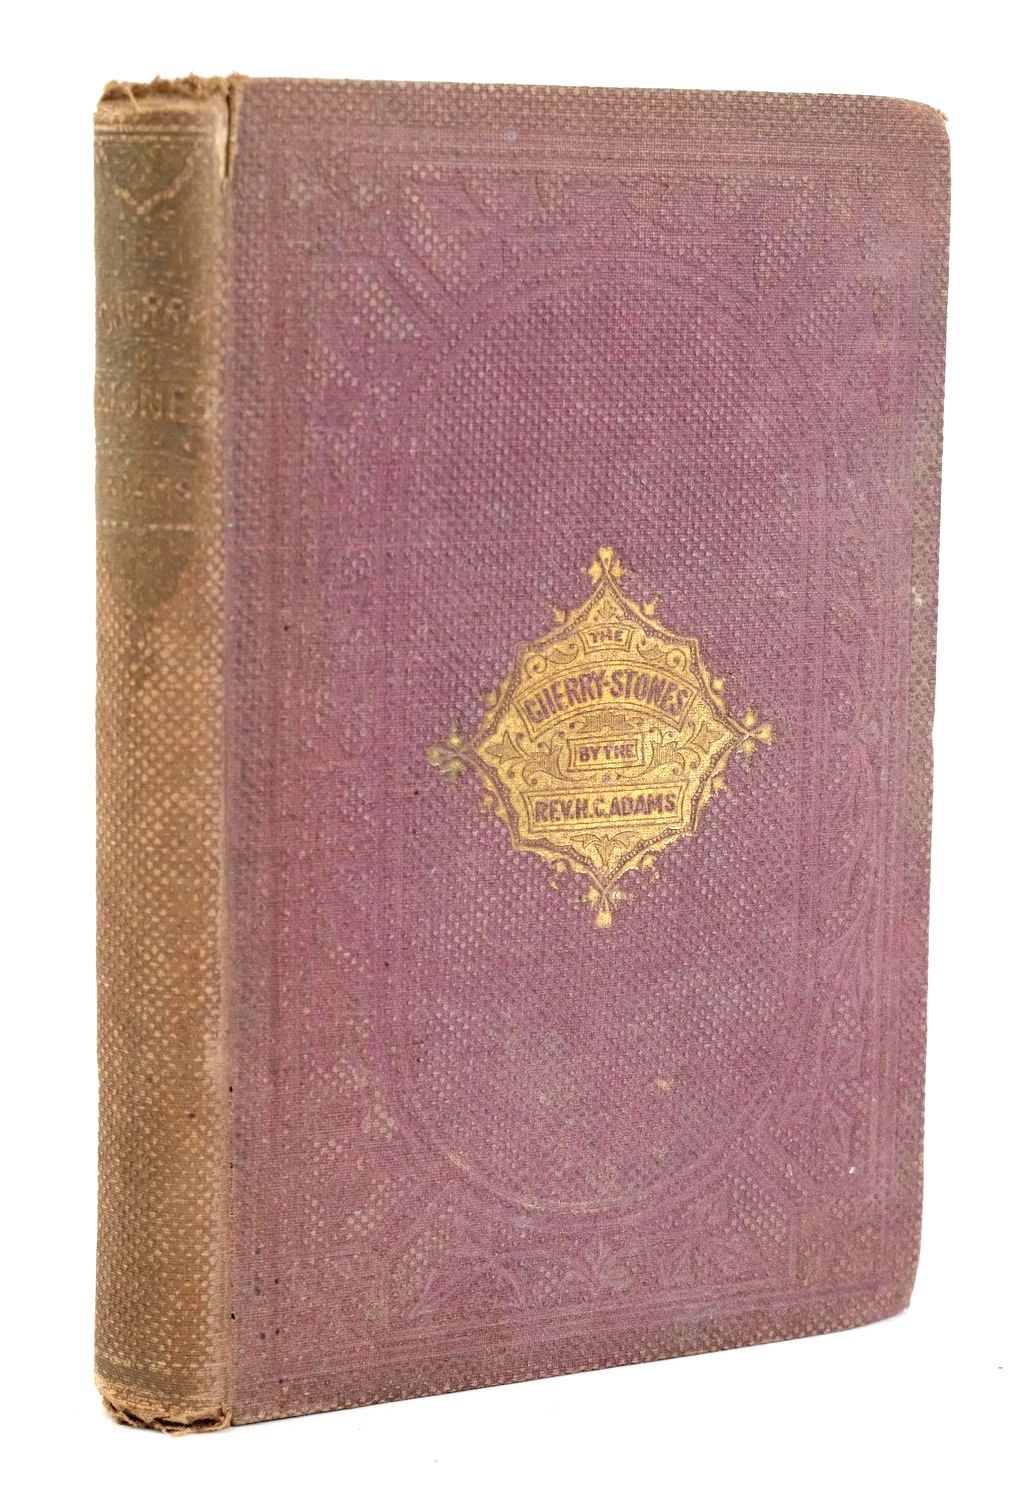 Photo of THE CHERRY-STONES; OR, THE FORCE OF CONSCIENCE written by Adams, William
Adams, Rev. H.C. illustrated by Absolon, John published by Routledge, Warne, And Routledge (STOCK CODE: 1319311)  for sale by Stella & Rose's Books